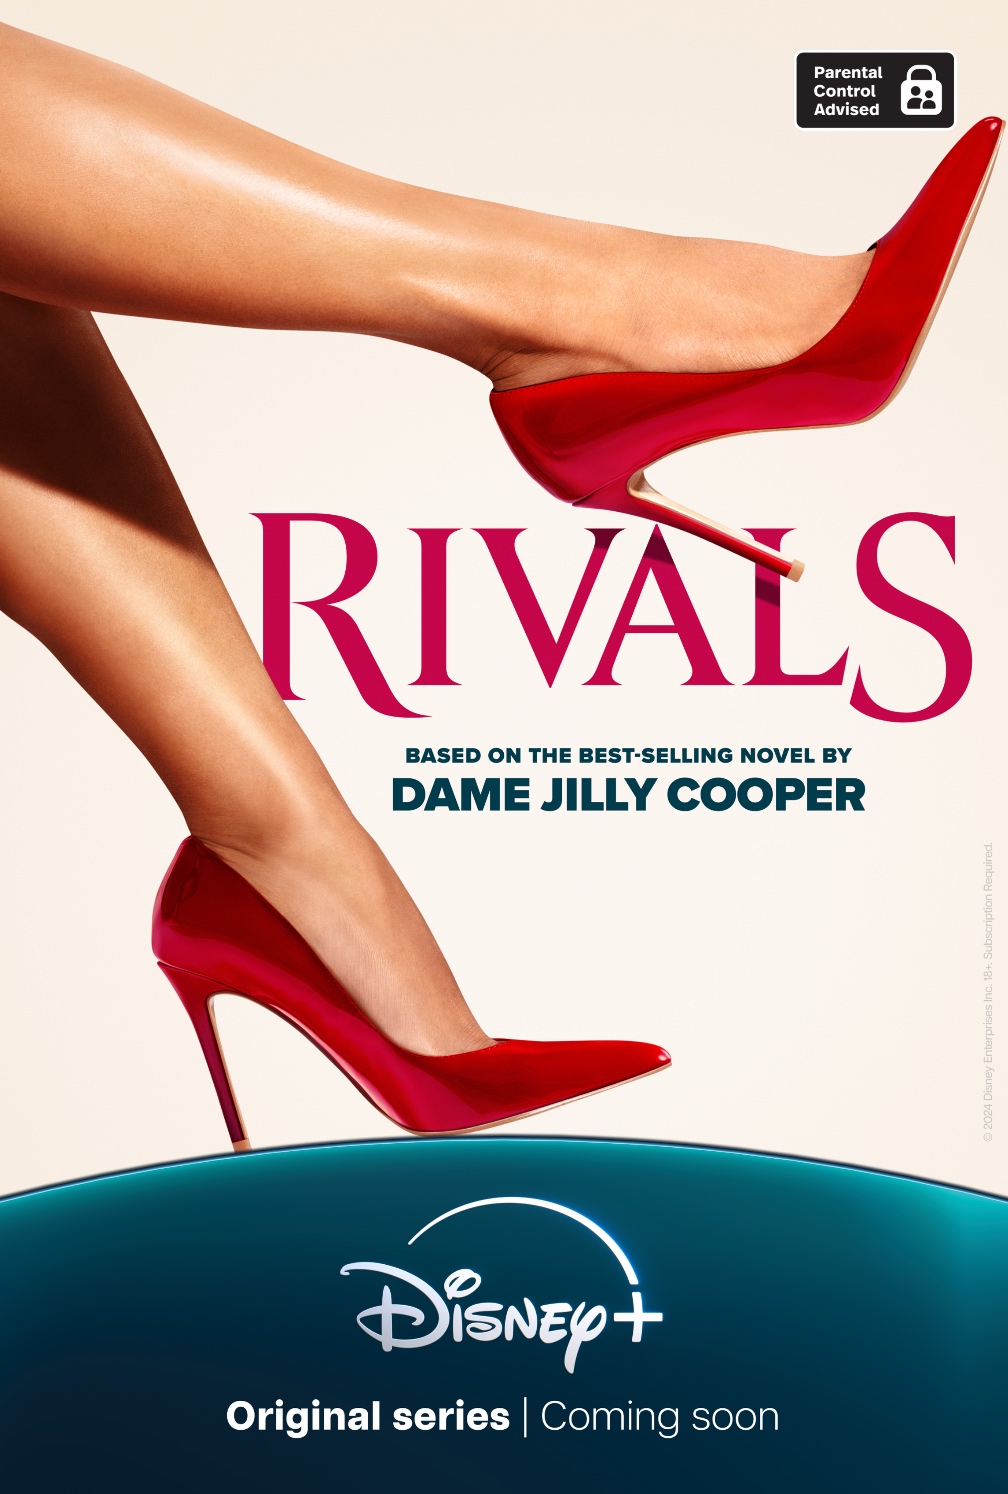 Disney+ reveals first look trailer for Dame Jilly Cooper's 'Rivals' featuring Emily Atack and more